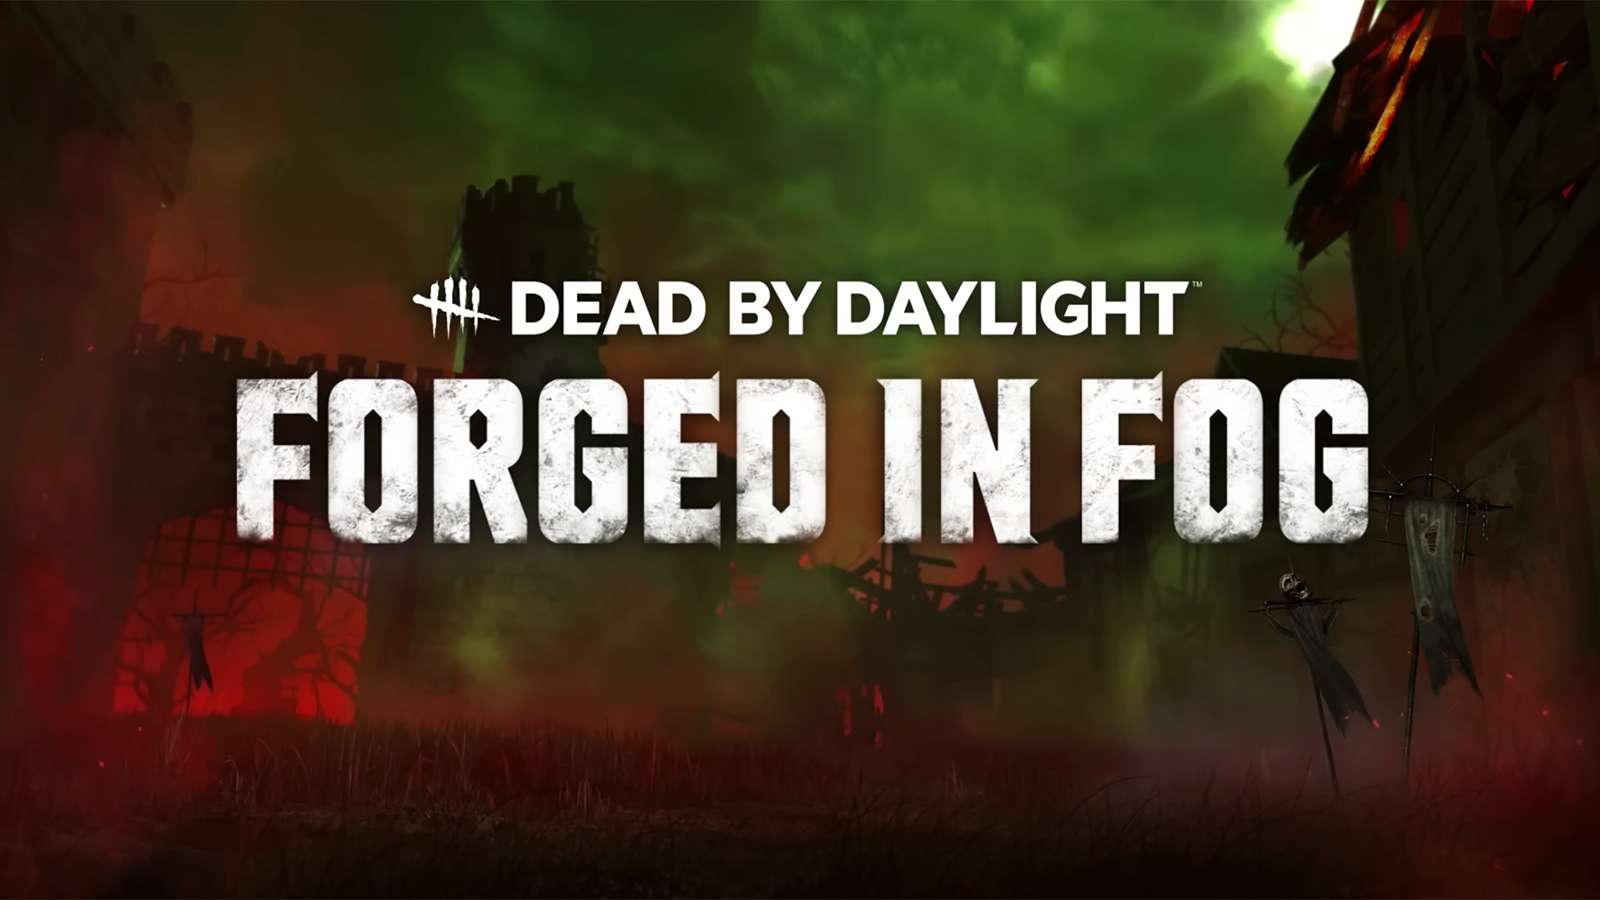 Forged in Fog chapter of Dead By Daylight